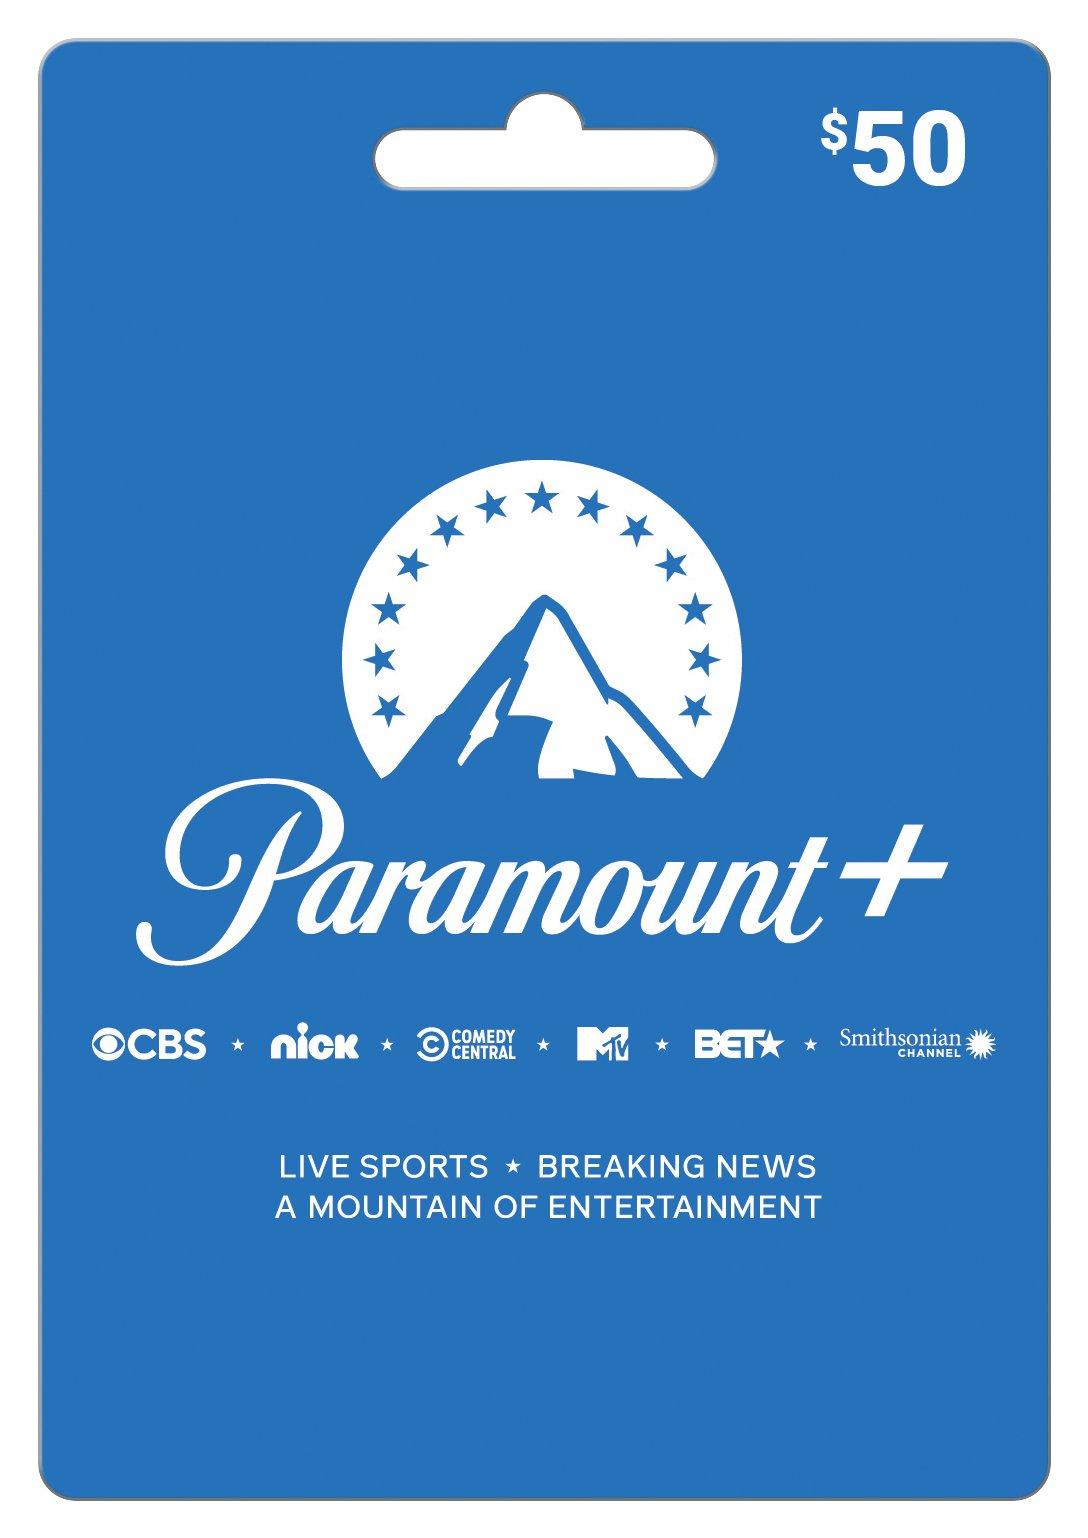 All the live sports on Paramount Plus